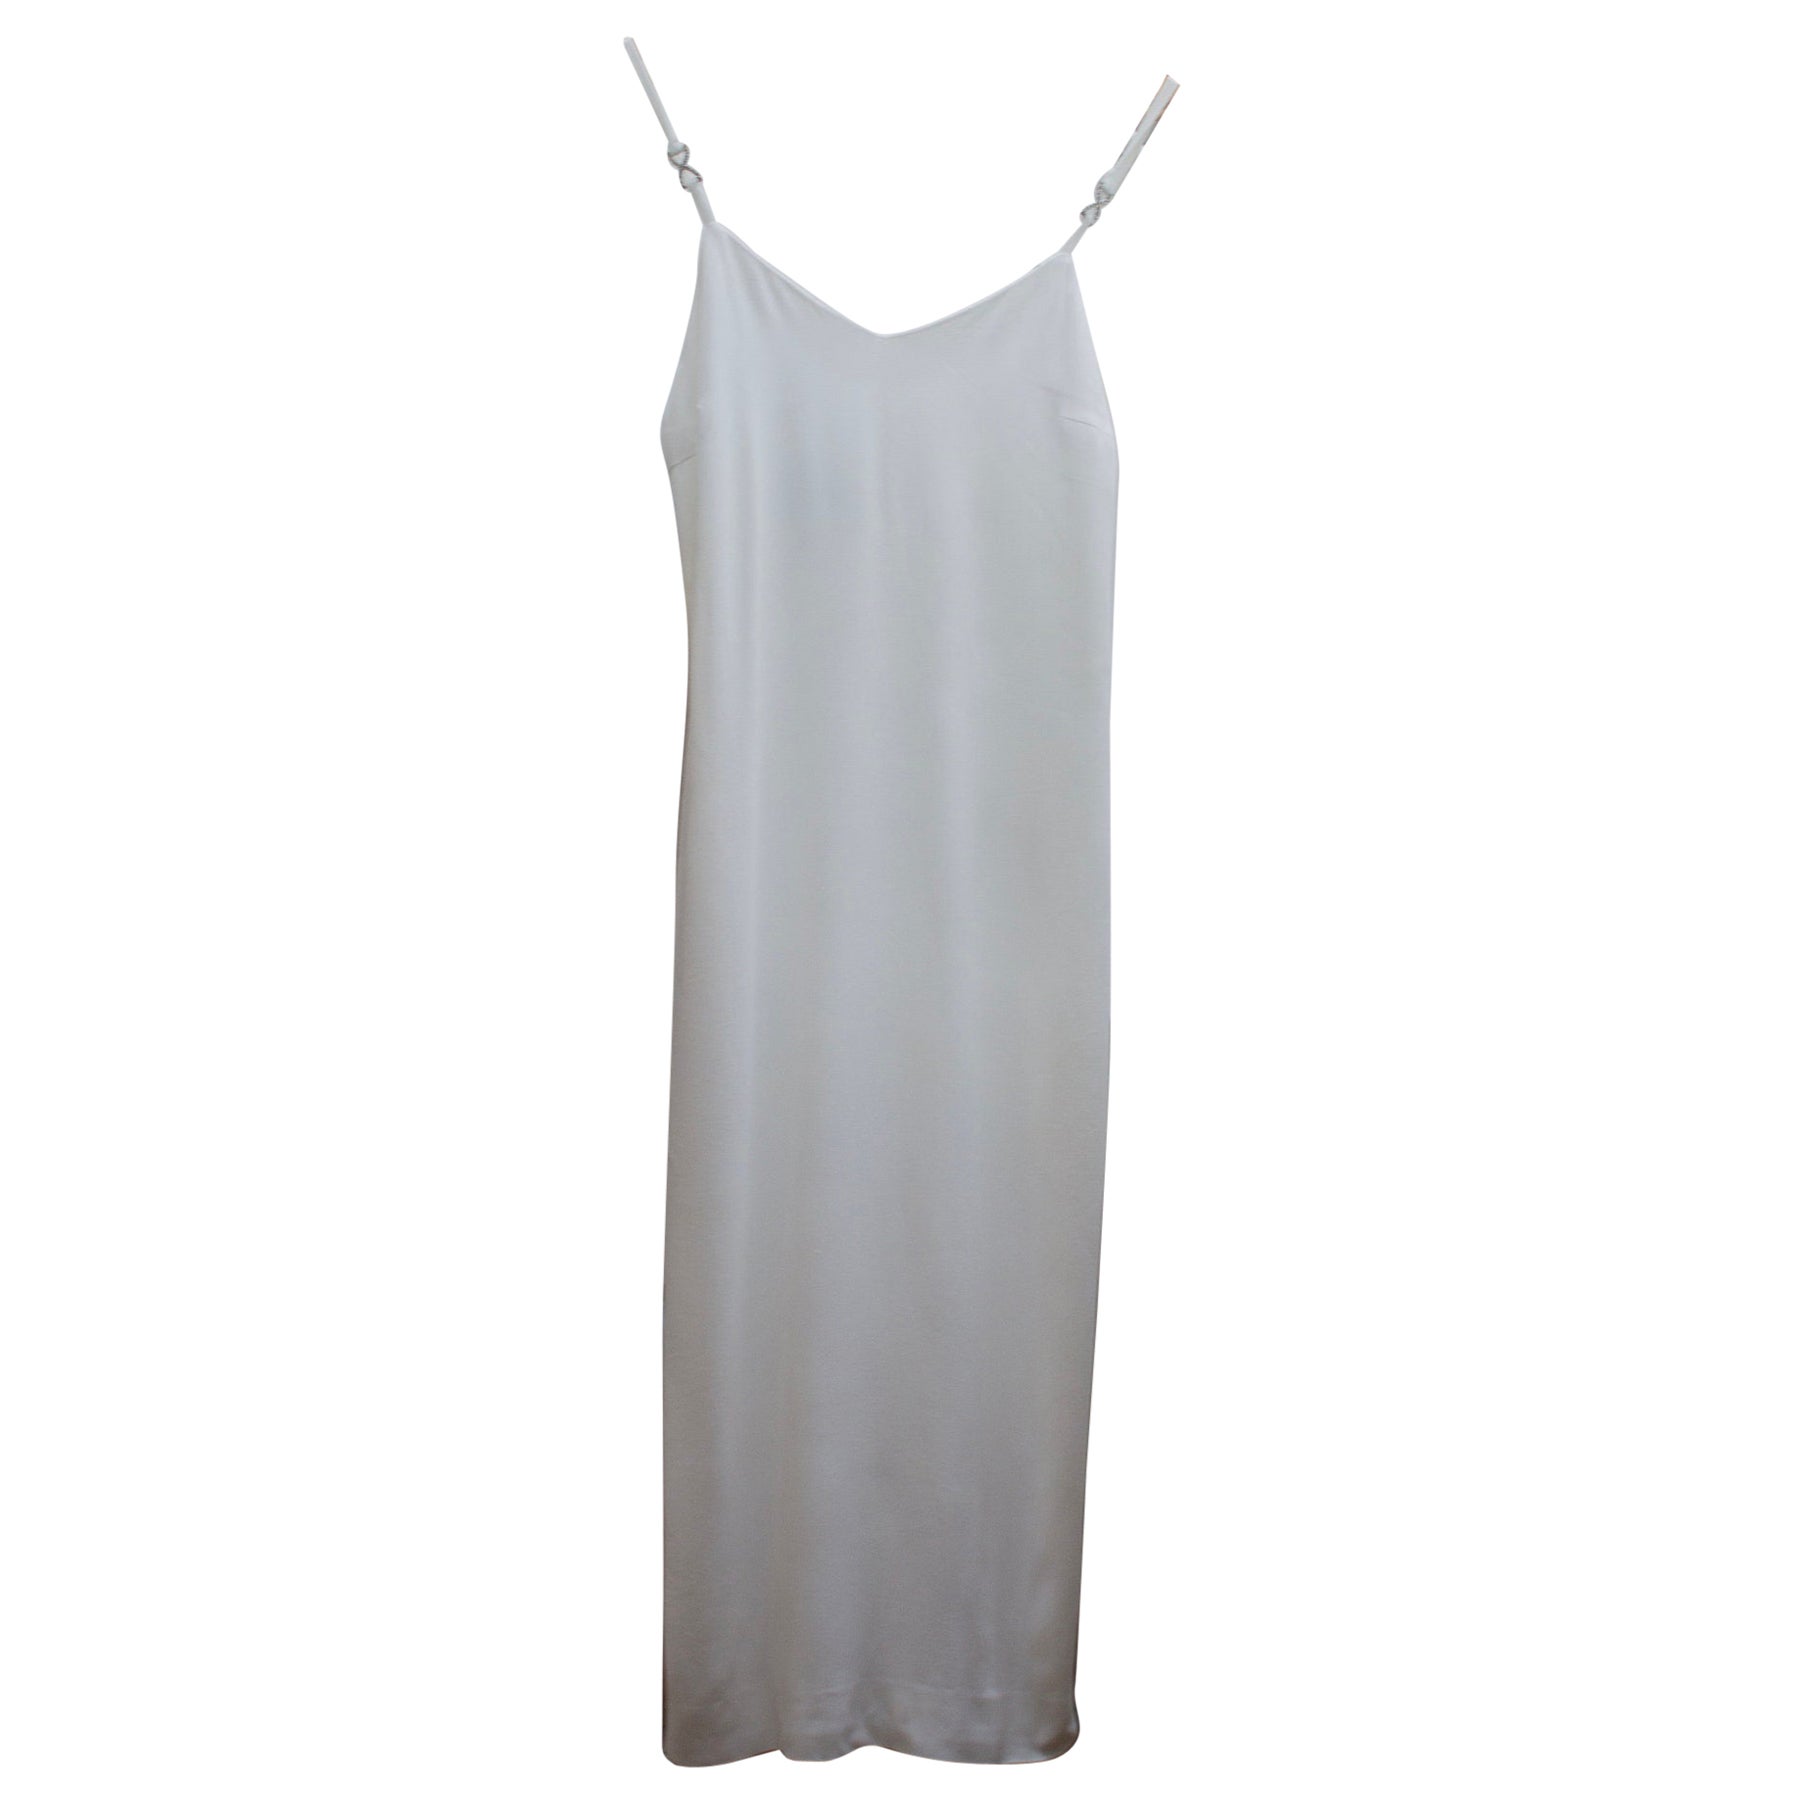 Versus by Gianni Versace 90's white slip dress with silver rhinestones shoulder  For Sale